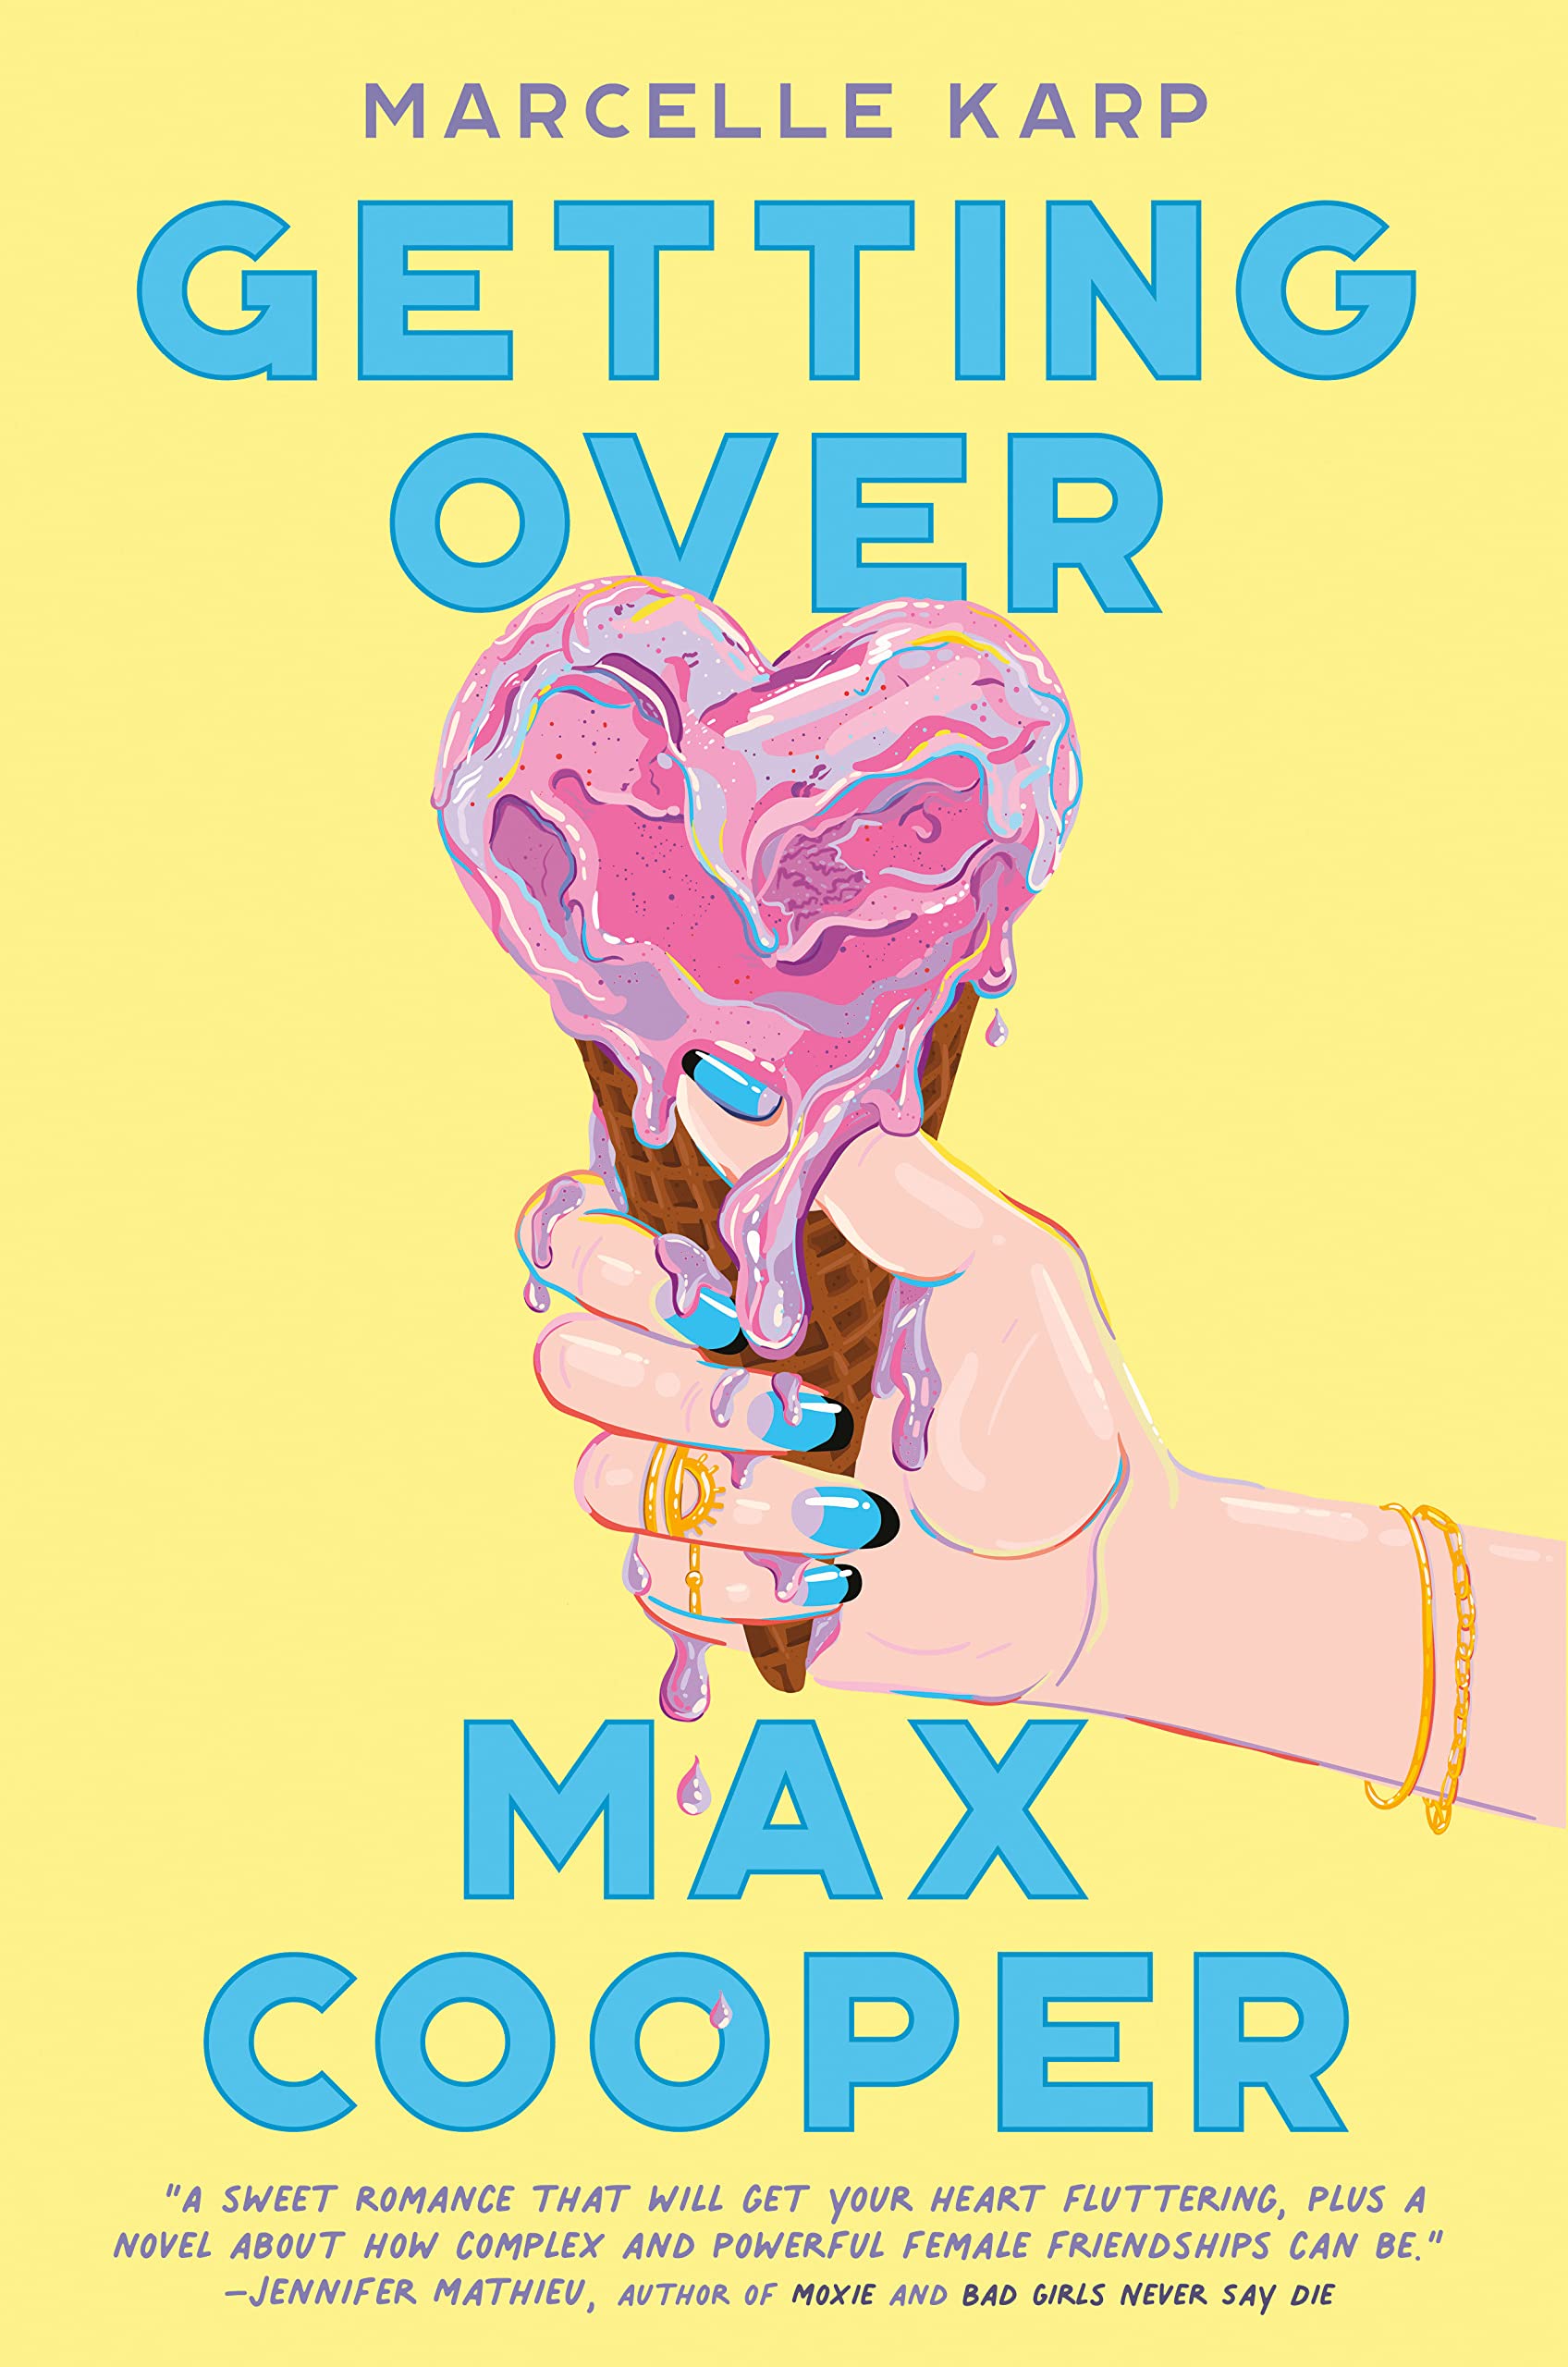 Cover of “Getting Over Max Cooper” by Marchelle Karp